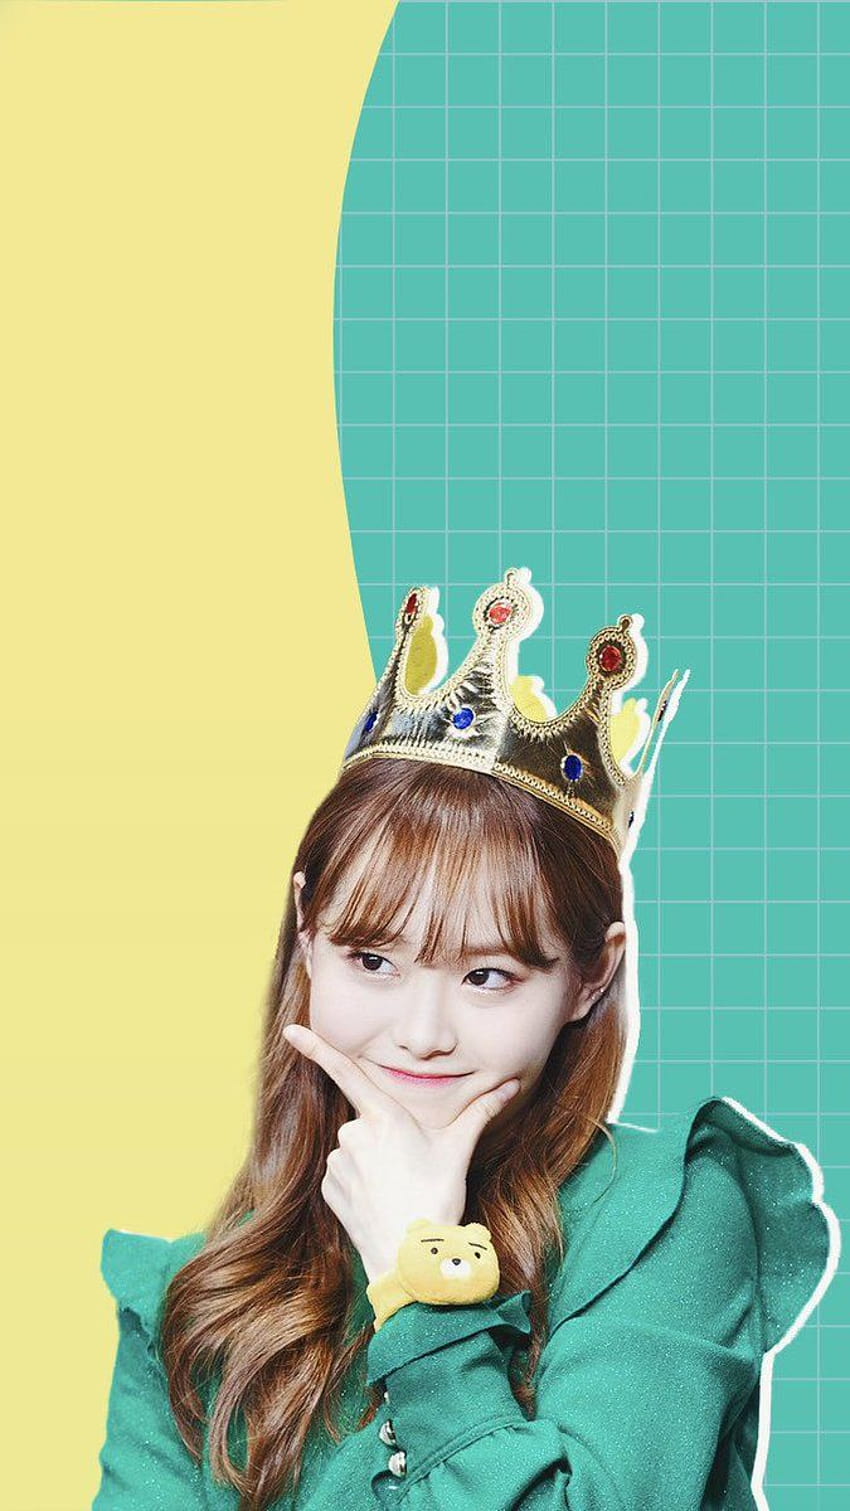 gowon do things ✧ˊ˗ on Twitter:, loona chuu wallpaper ponsel HD